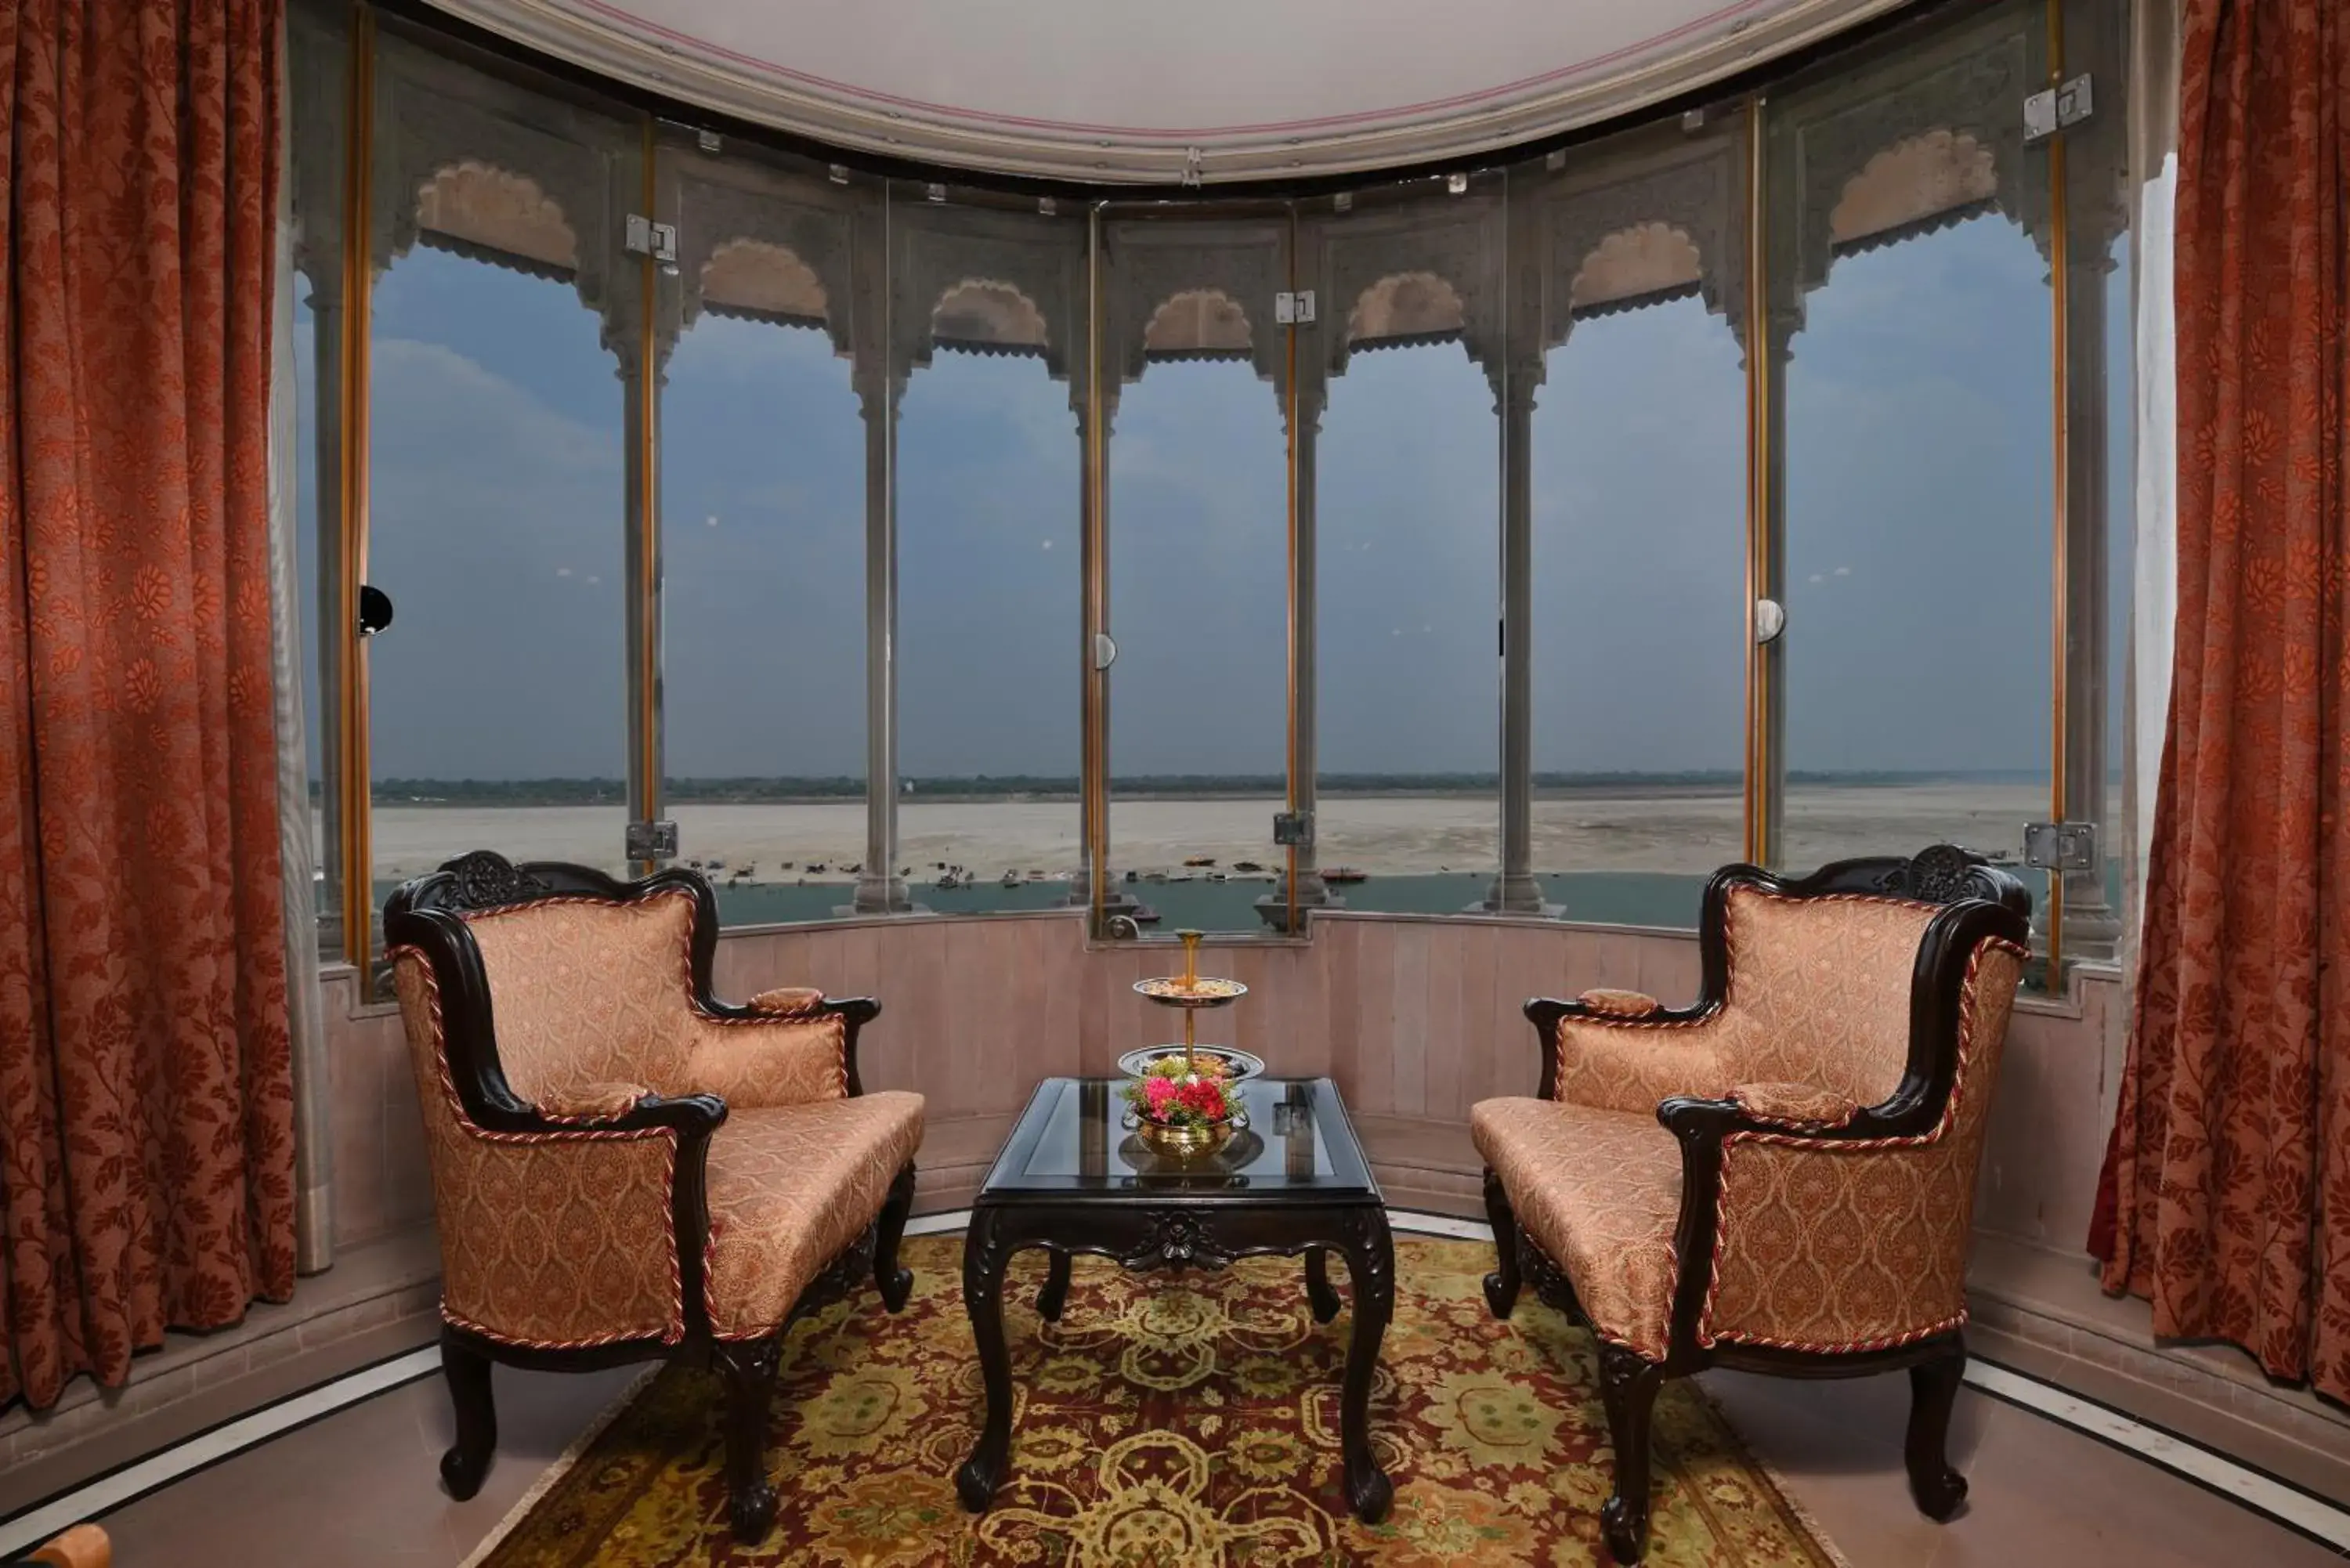 Seating Area in BrijRama Palace, Varanasi by the Ganges